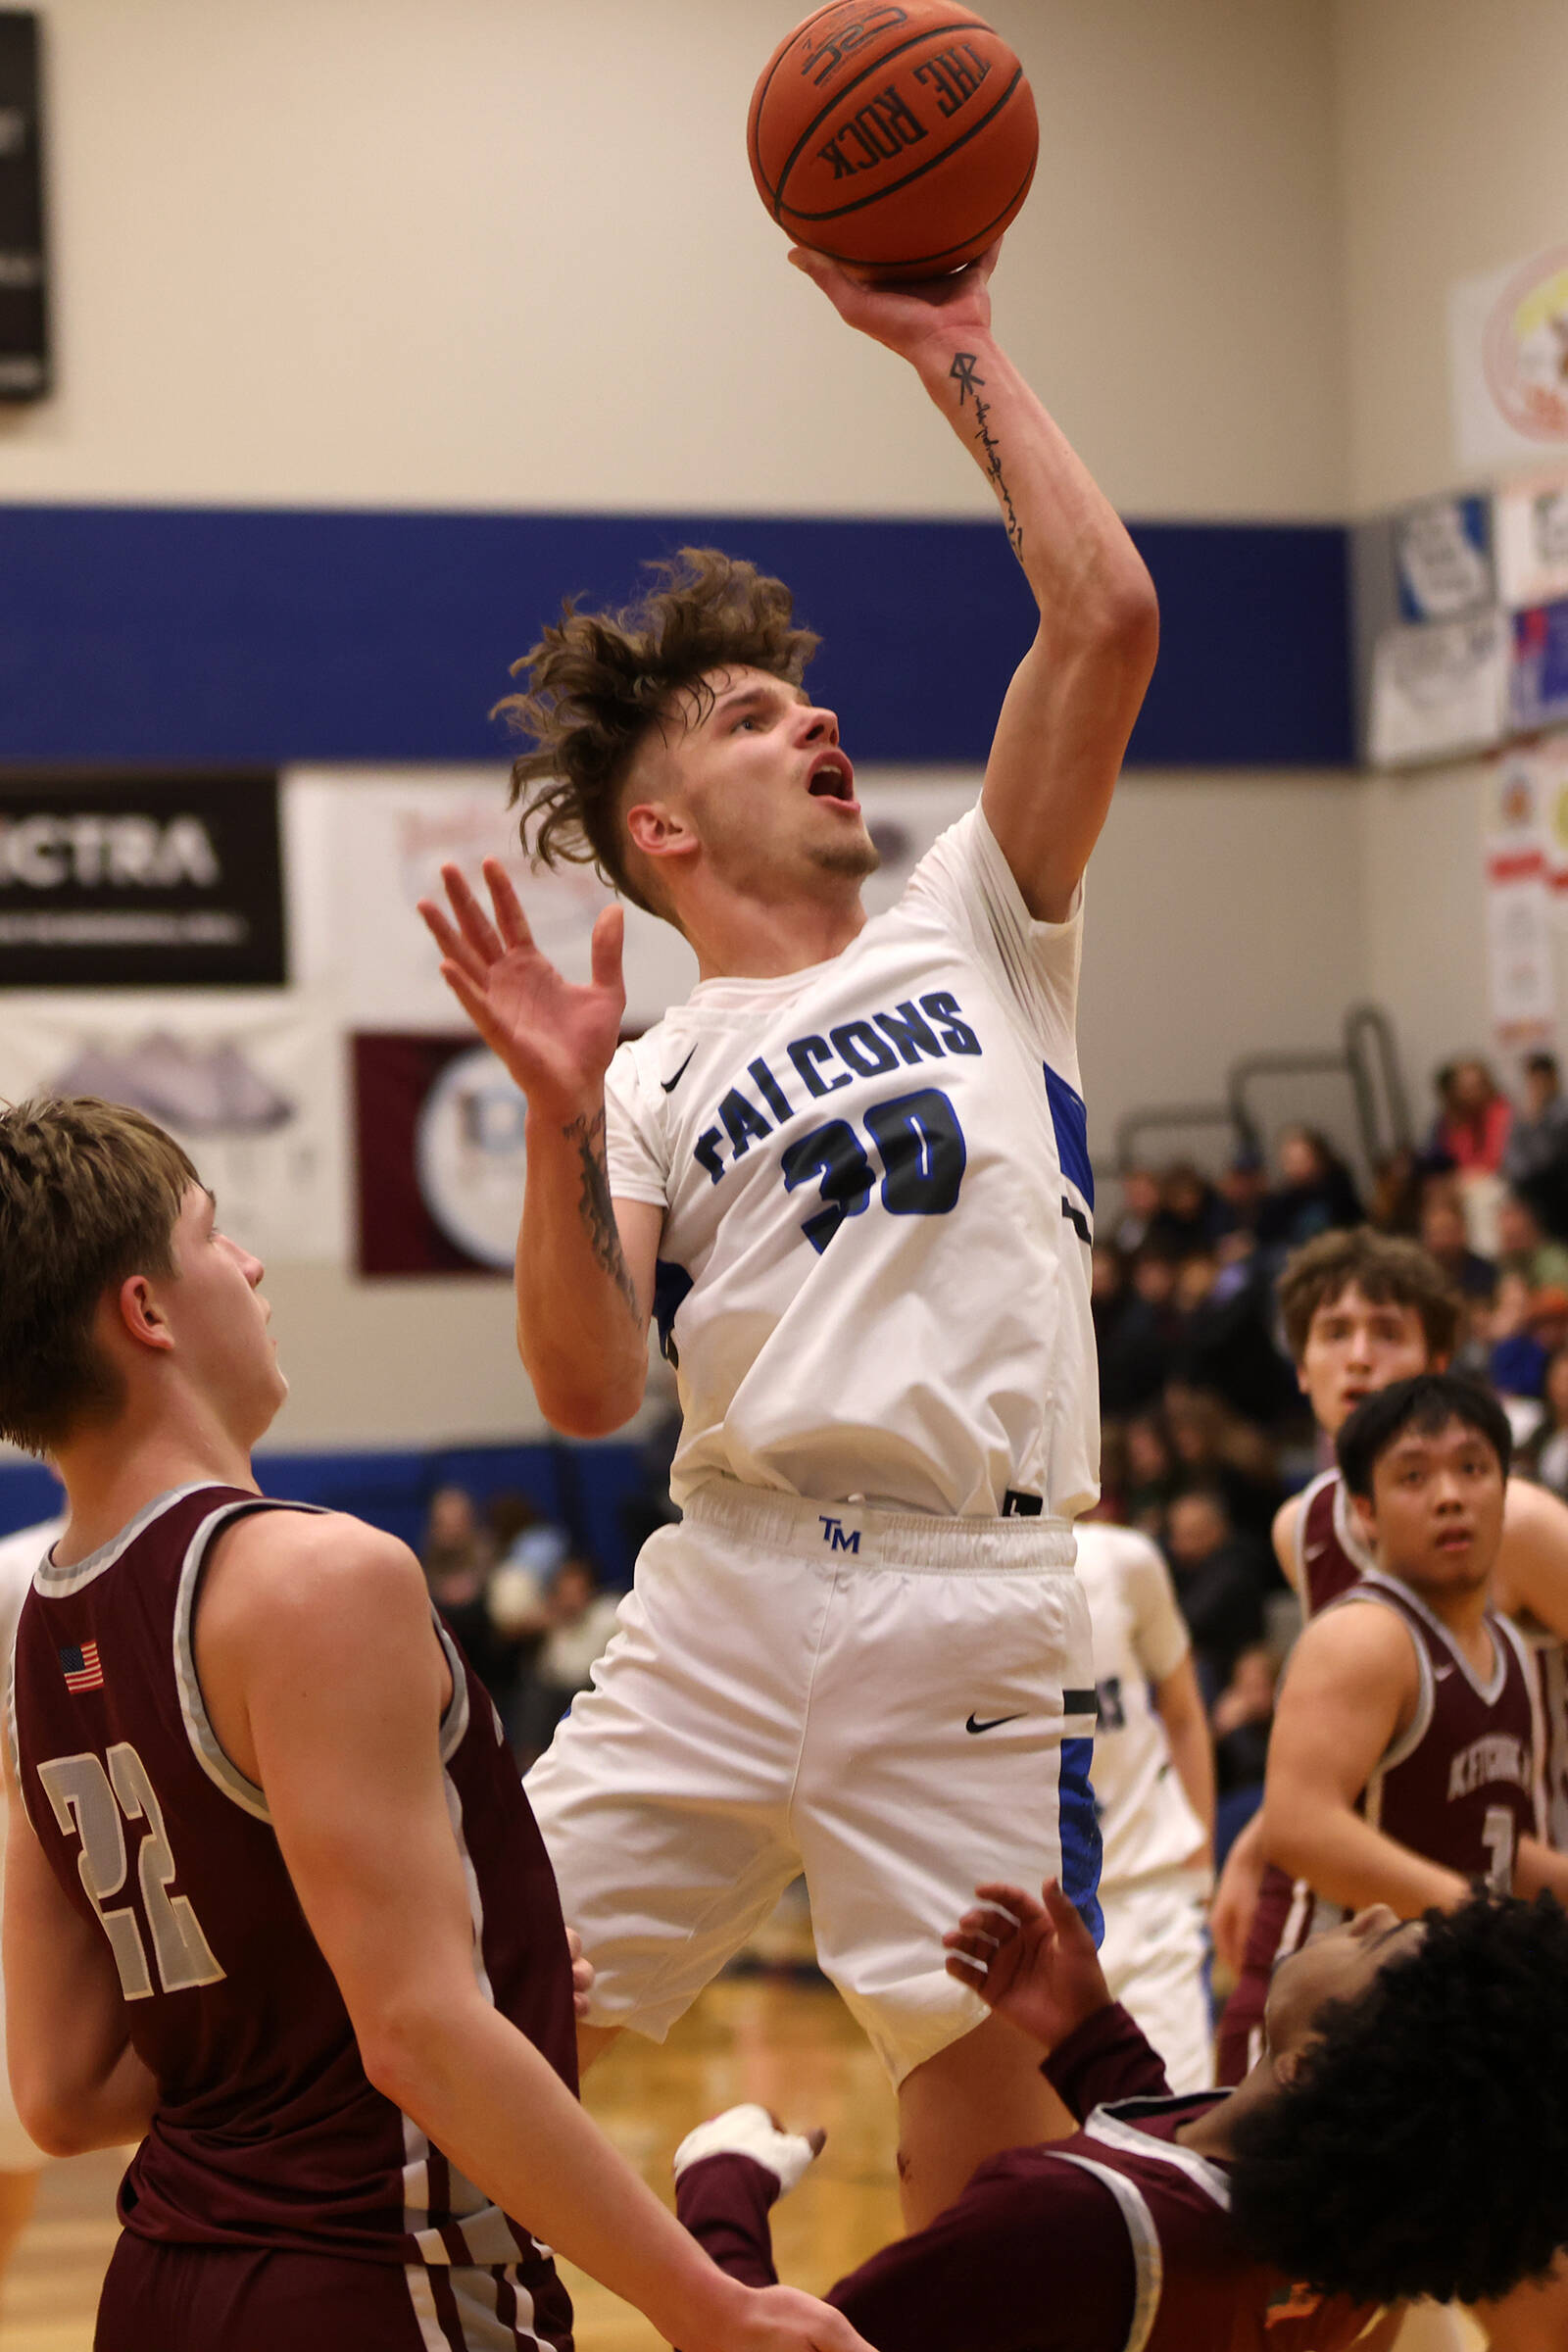 TMHS junior Thomas Baxter (30) takes a tough shot in traffic late in a Friday night 64-59 win against Ketchikan High School. For the second year in a row, Baxter earned second team all-state honors. (Ben Hohenstatt / Juneau Empire)